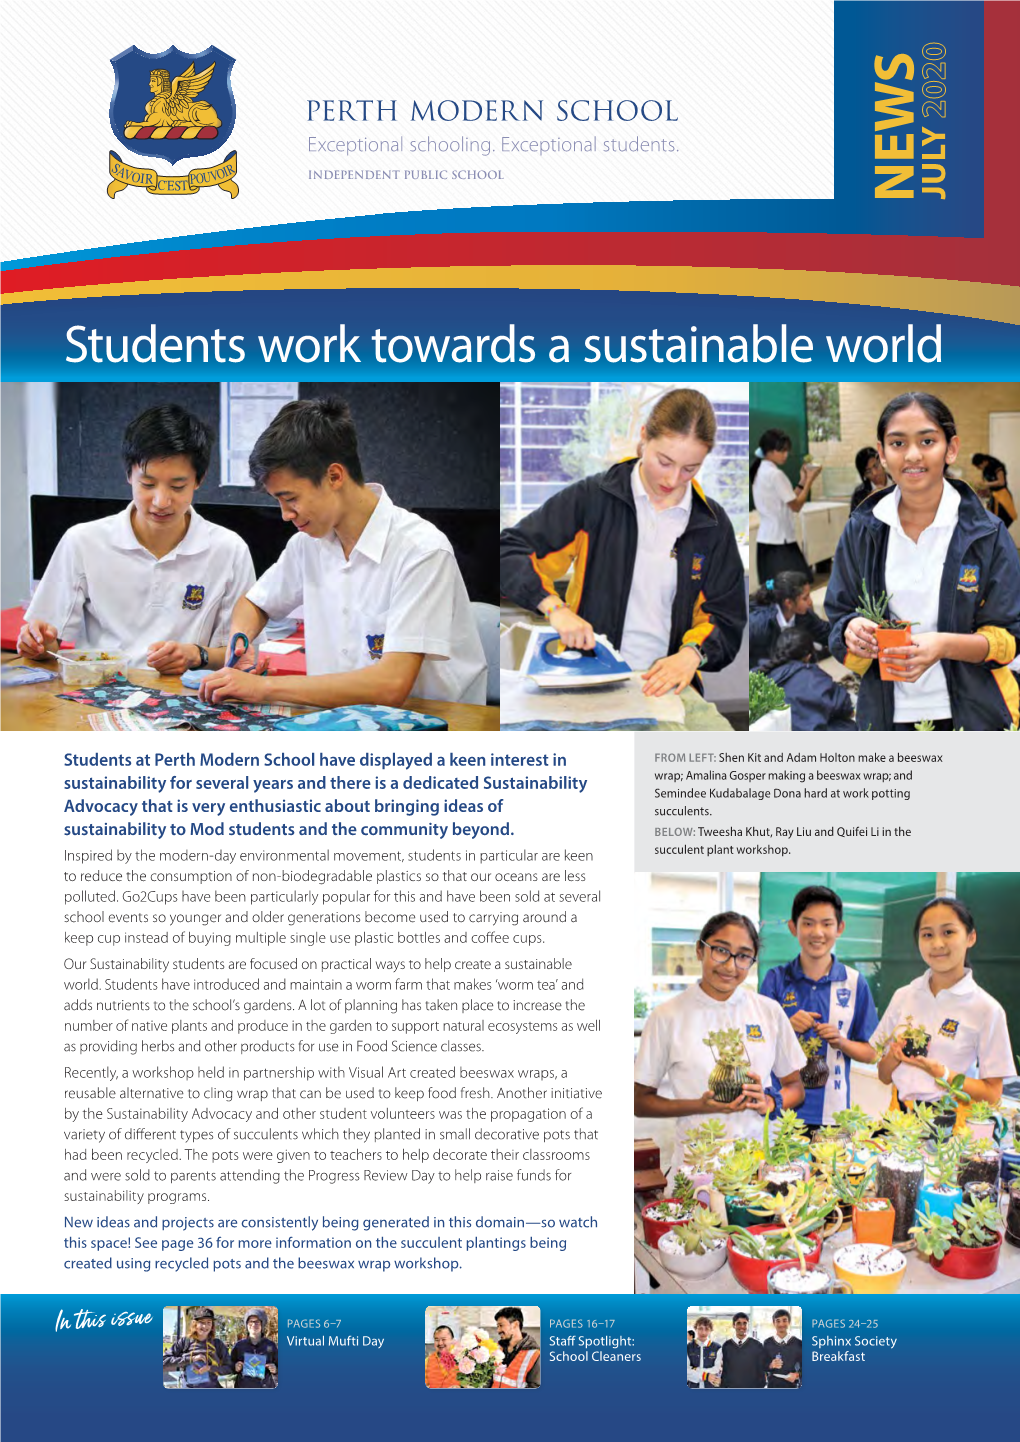 Students Work Towards a Sustainable World